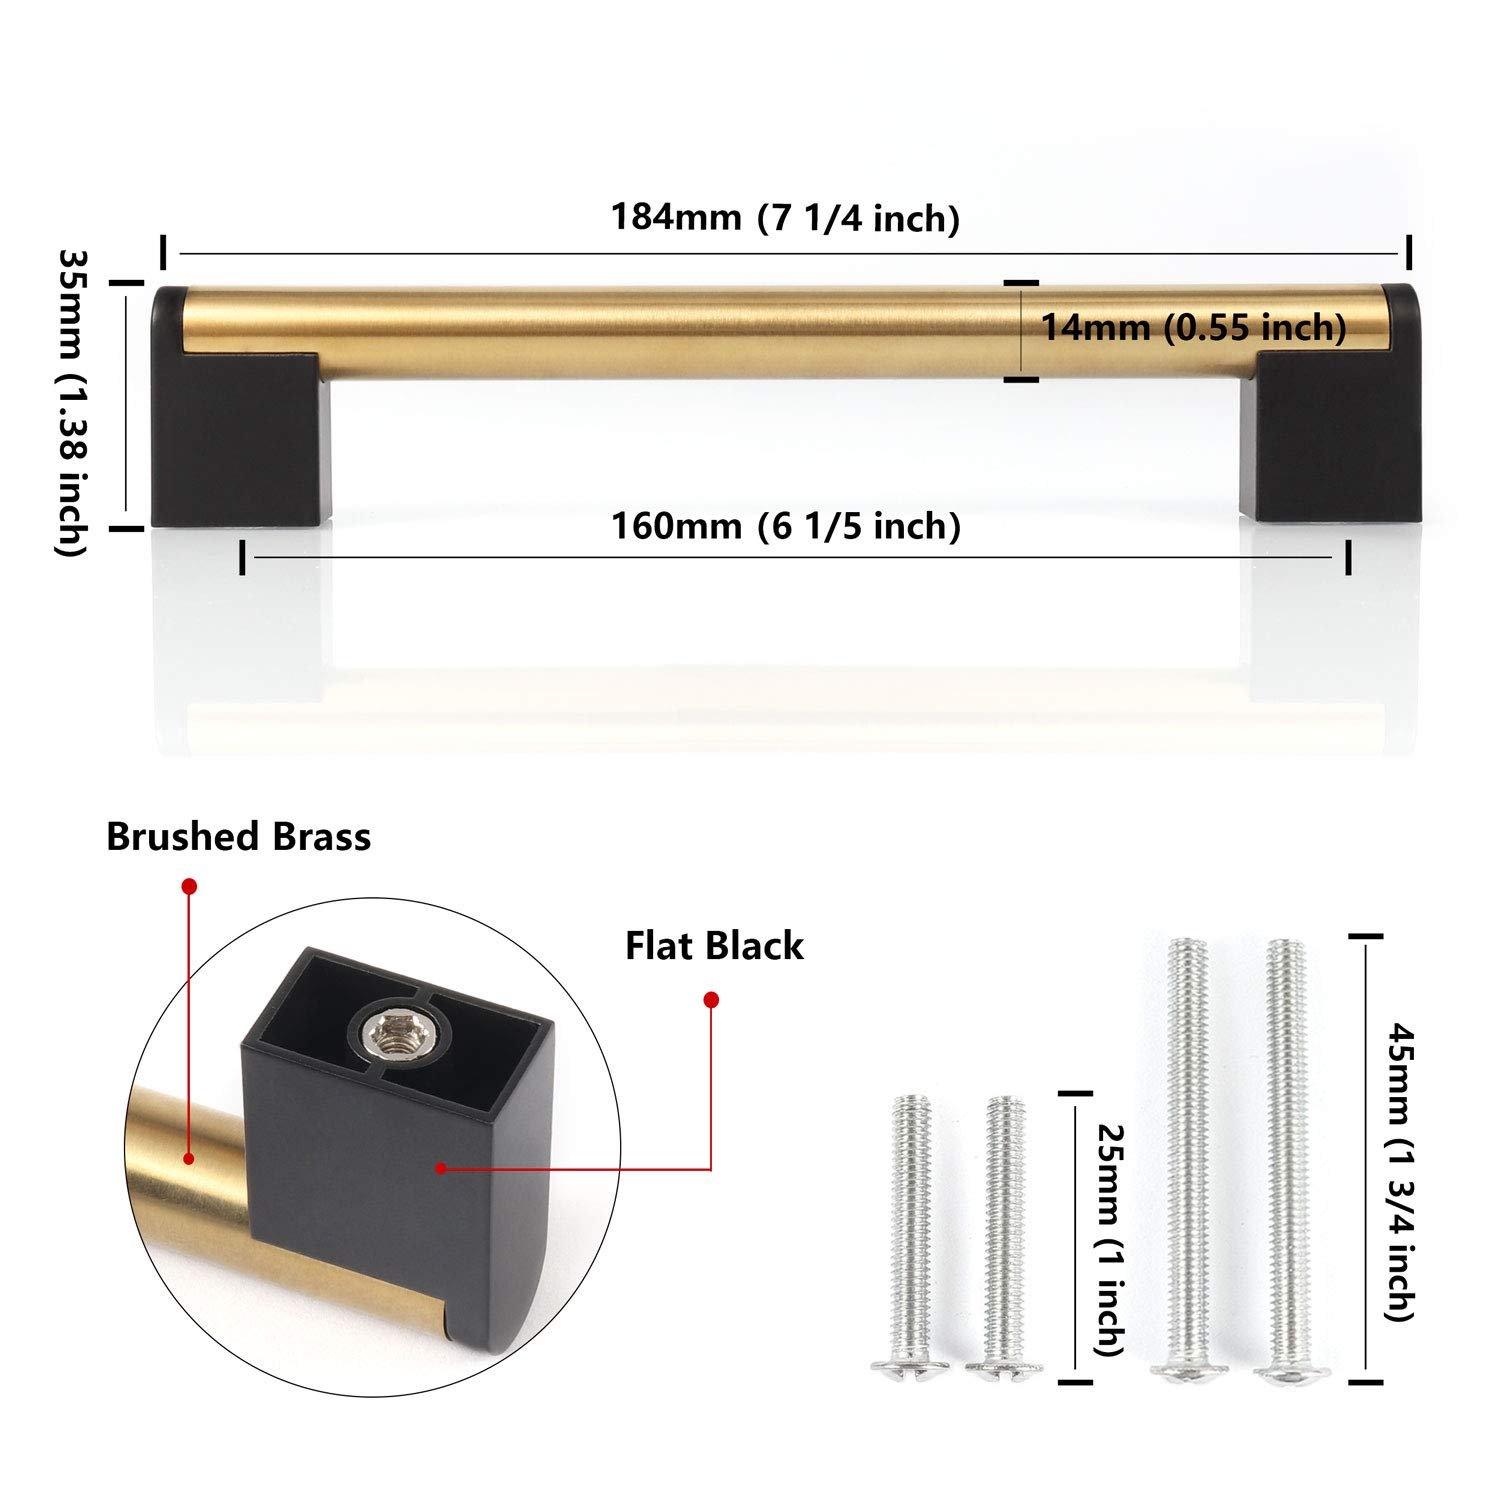 FULGENTE 10 Pack 6.3in 160mm Gold Brushed Brass Cabinet Handles Stainless Steel Round Black Square Zinc Pull Knobs for Kitchen Drawer Closet Bar Appliance Handle CC6 1/5 inch - image 2 of 5